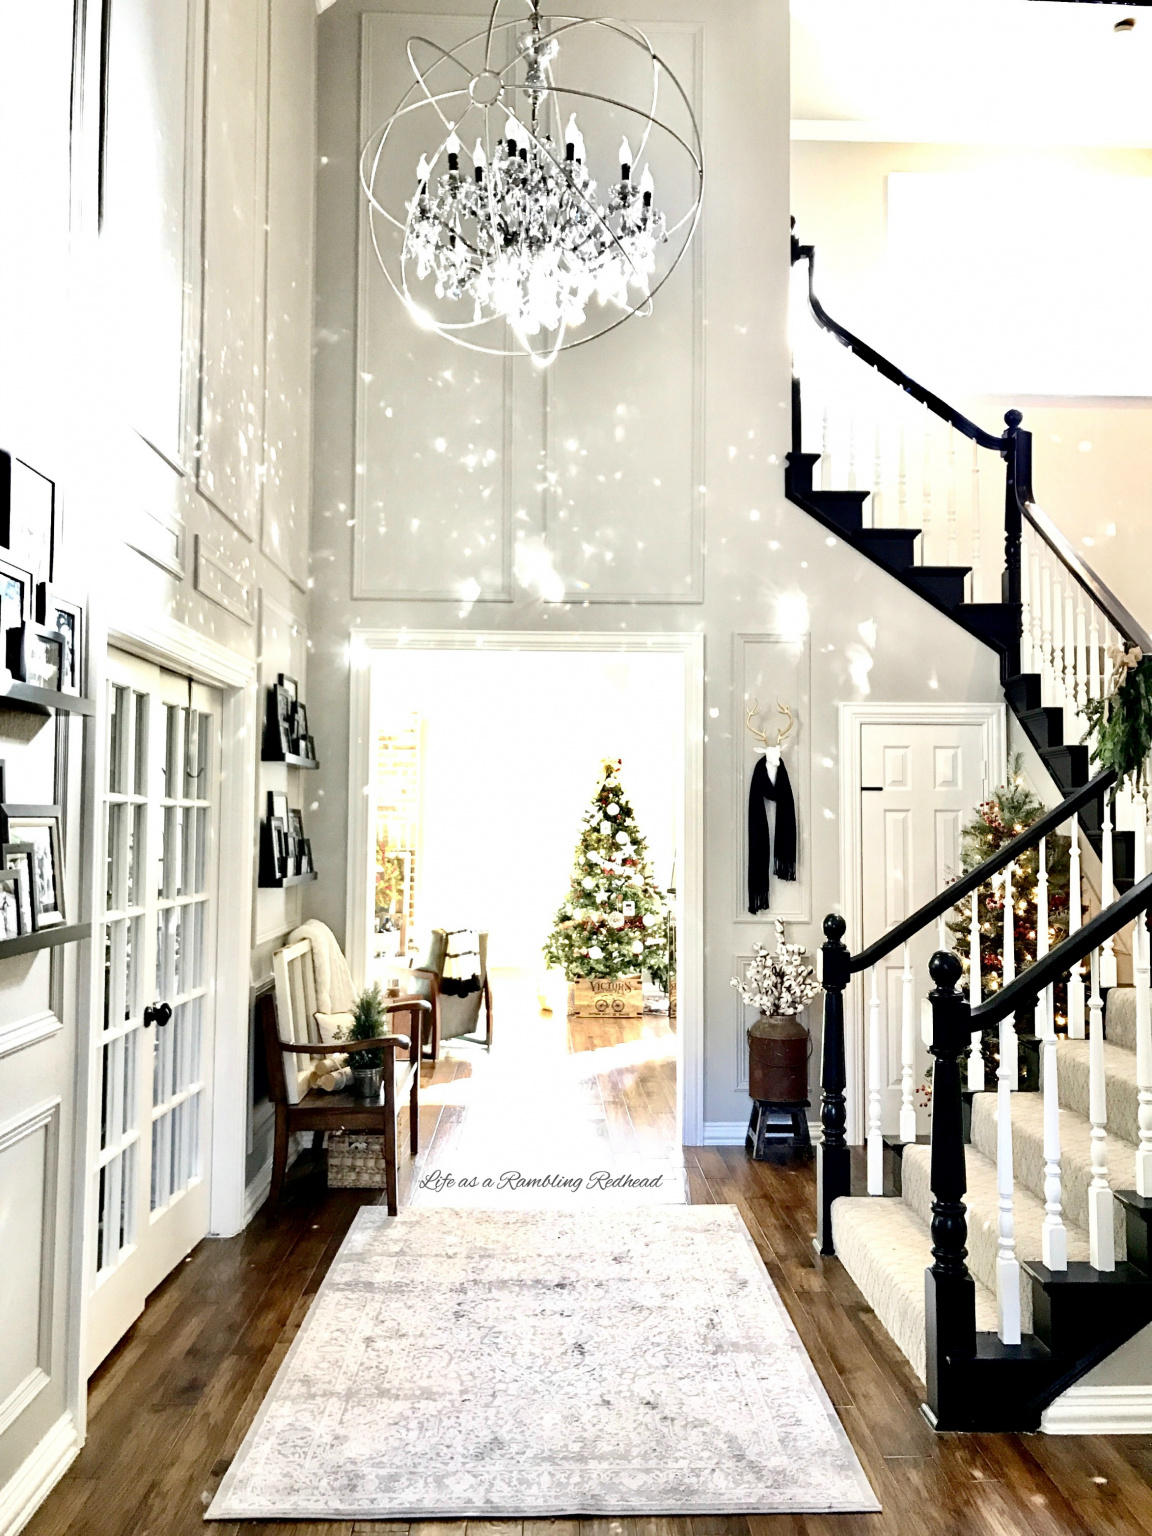 My Renovated Rustic Farmhouse Holiday Home Tour And Christmas Card ...